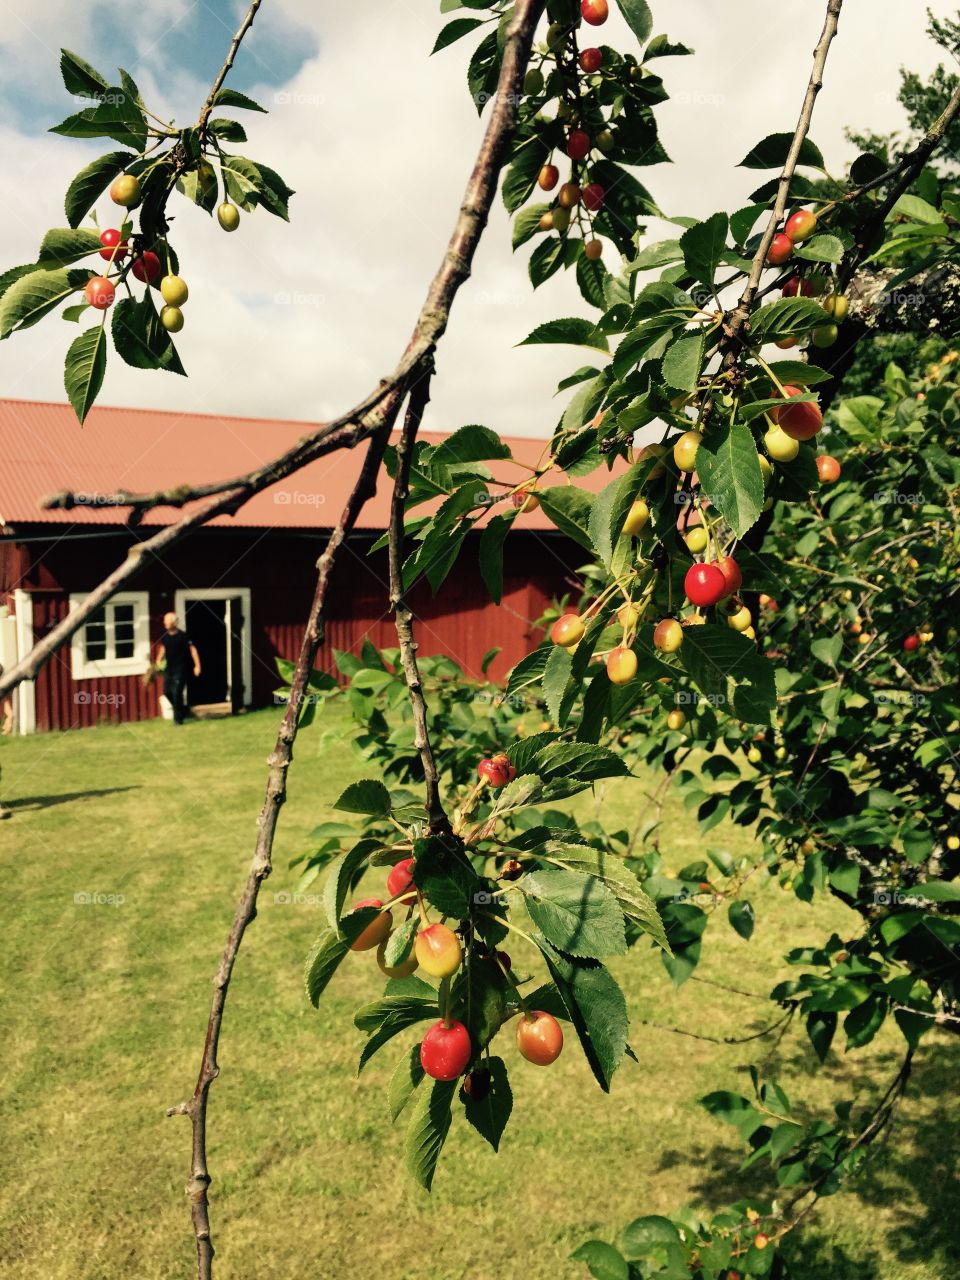 Cherries and the barn. Two of the things I love. Cherries and the barn where I spent my summers as a kid. 